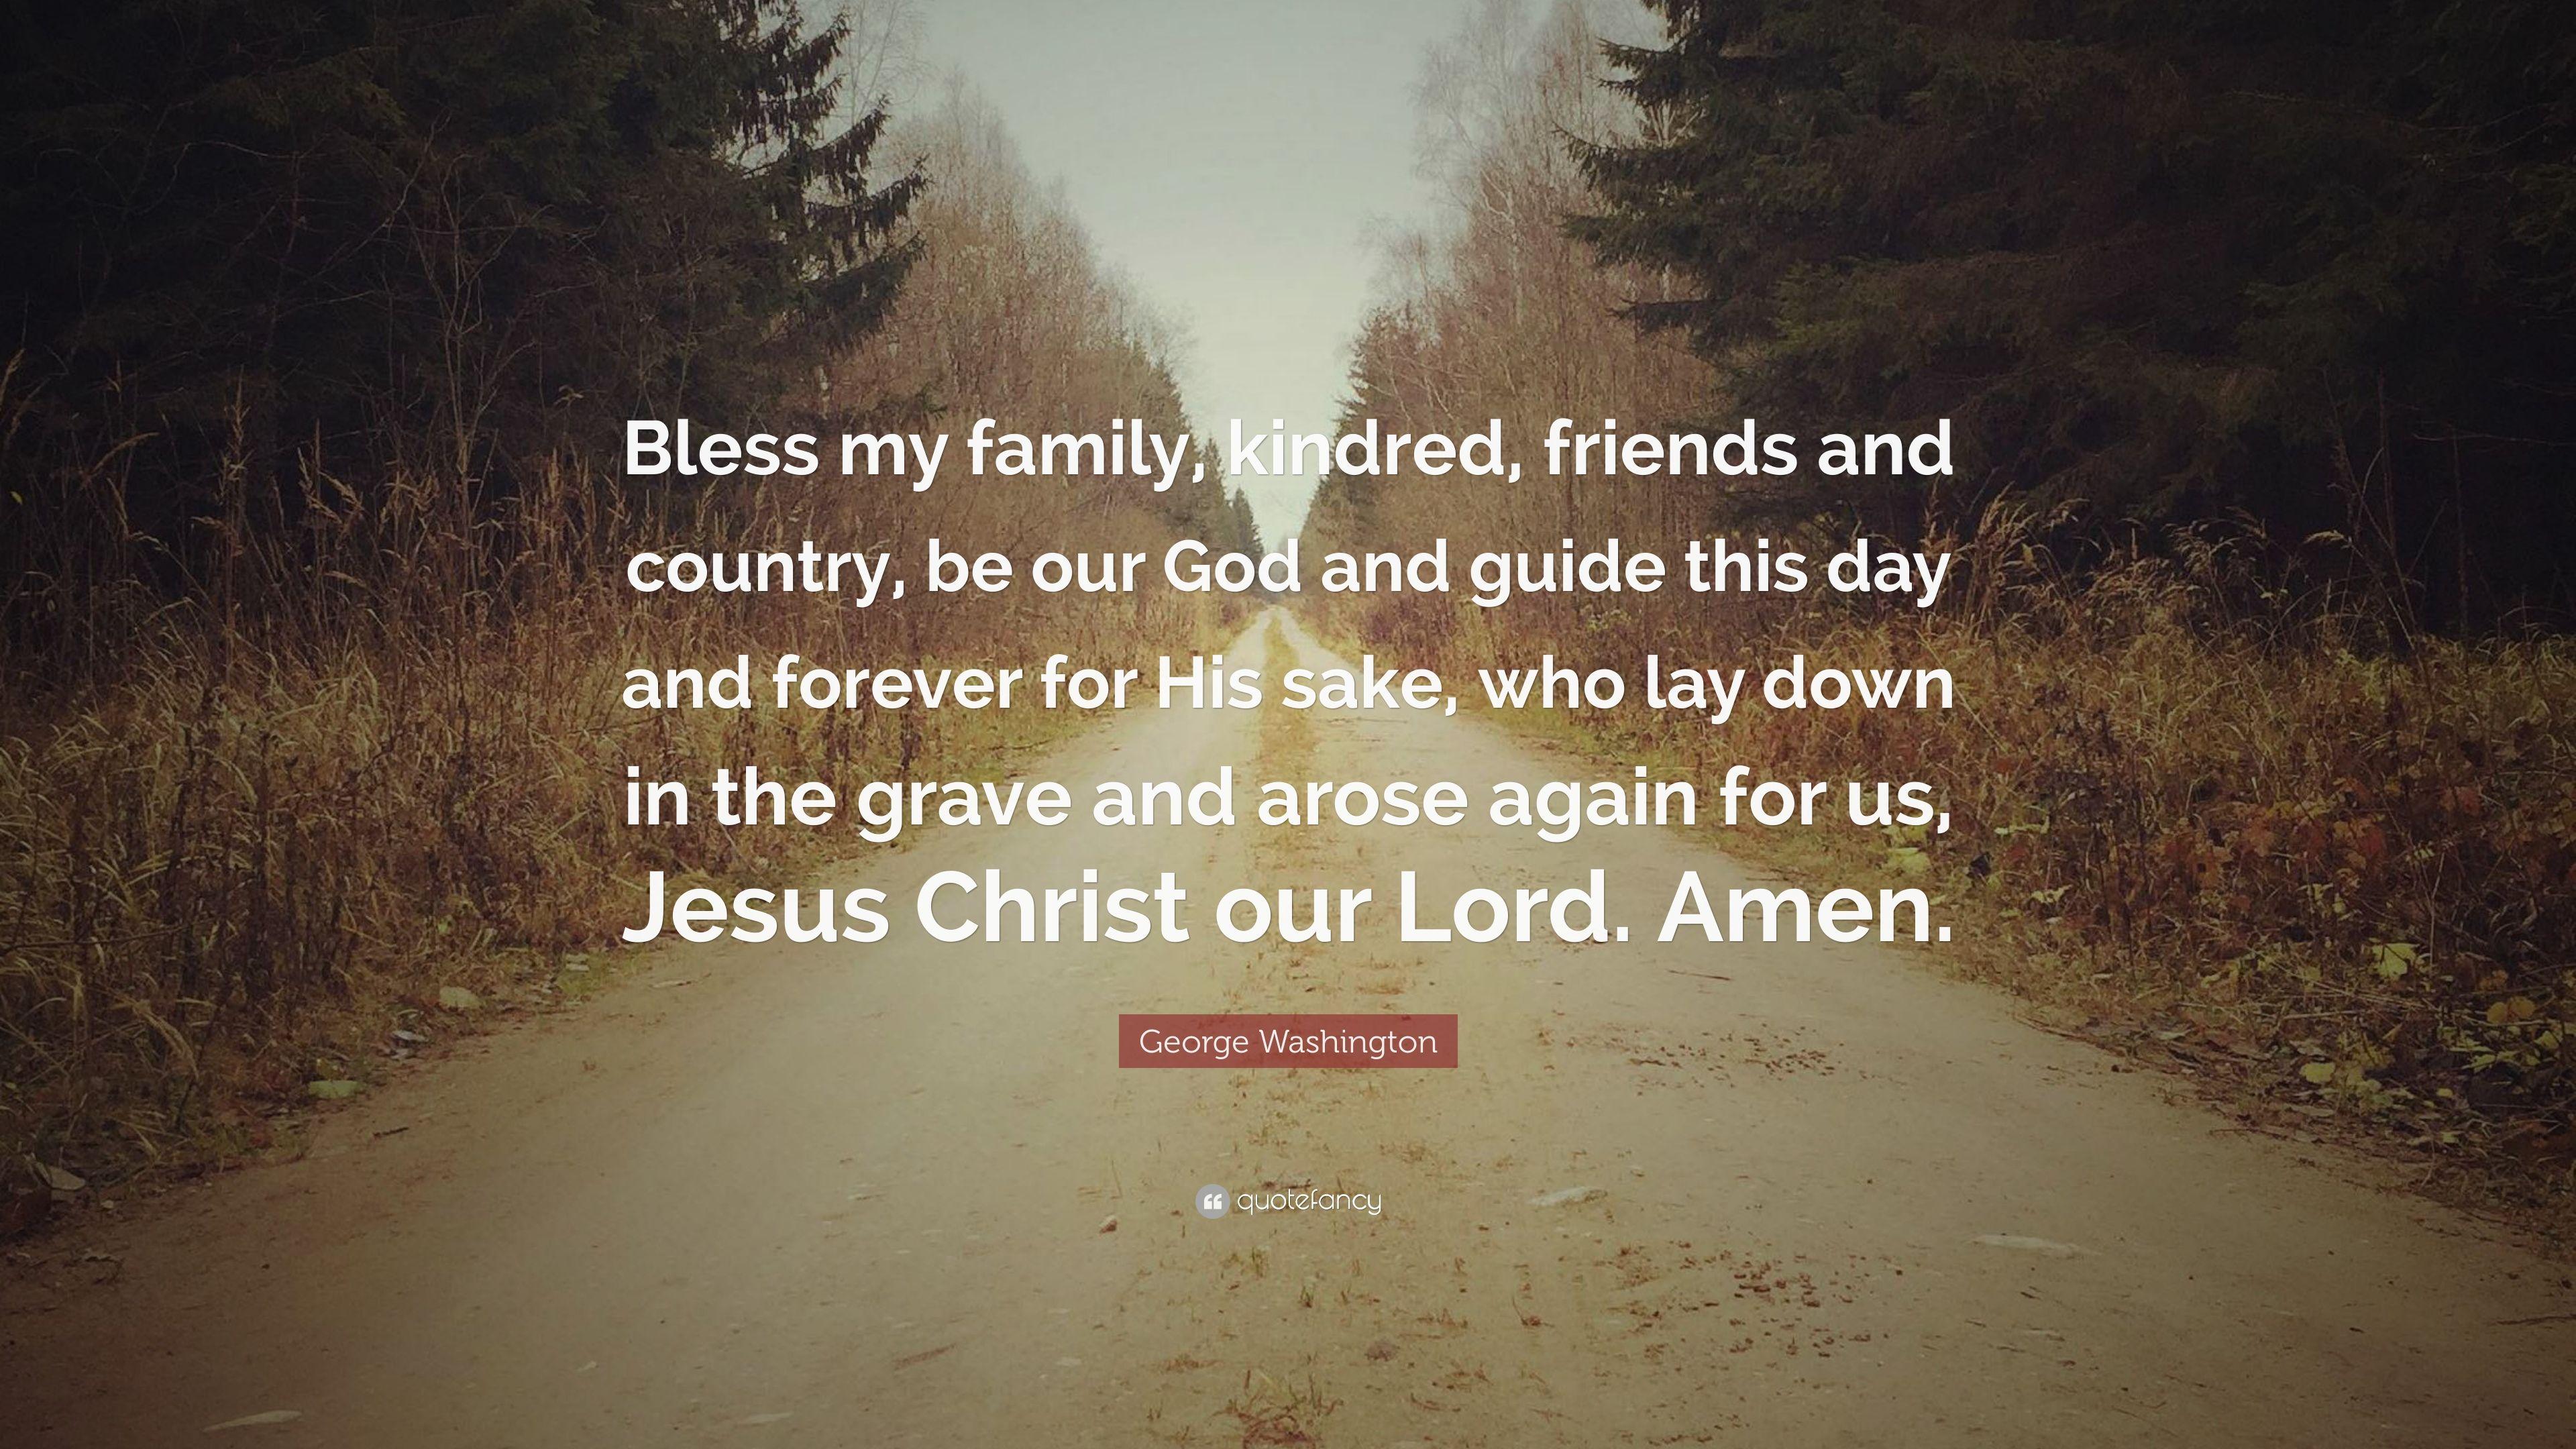 George Washington Quote: “Bless my family, kindred, friends